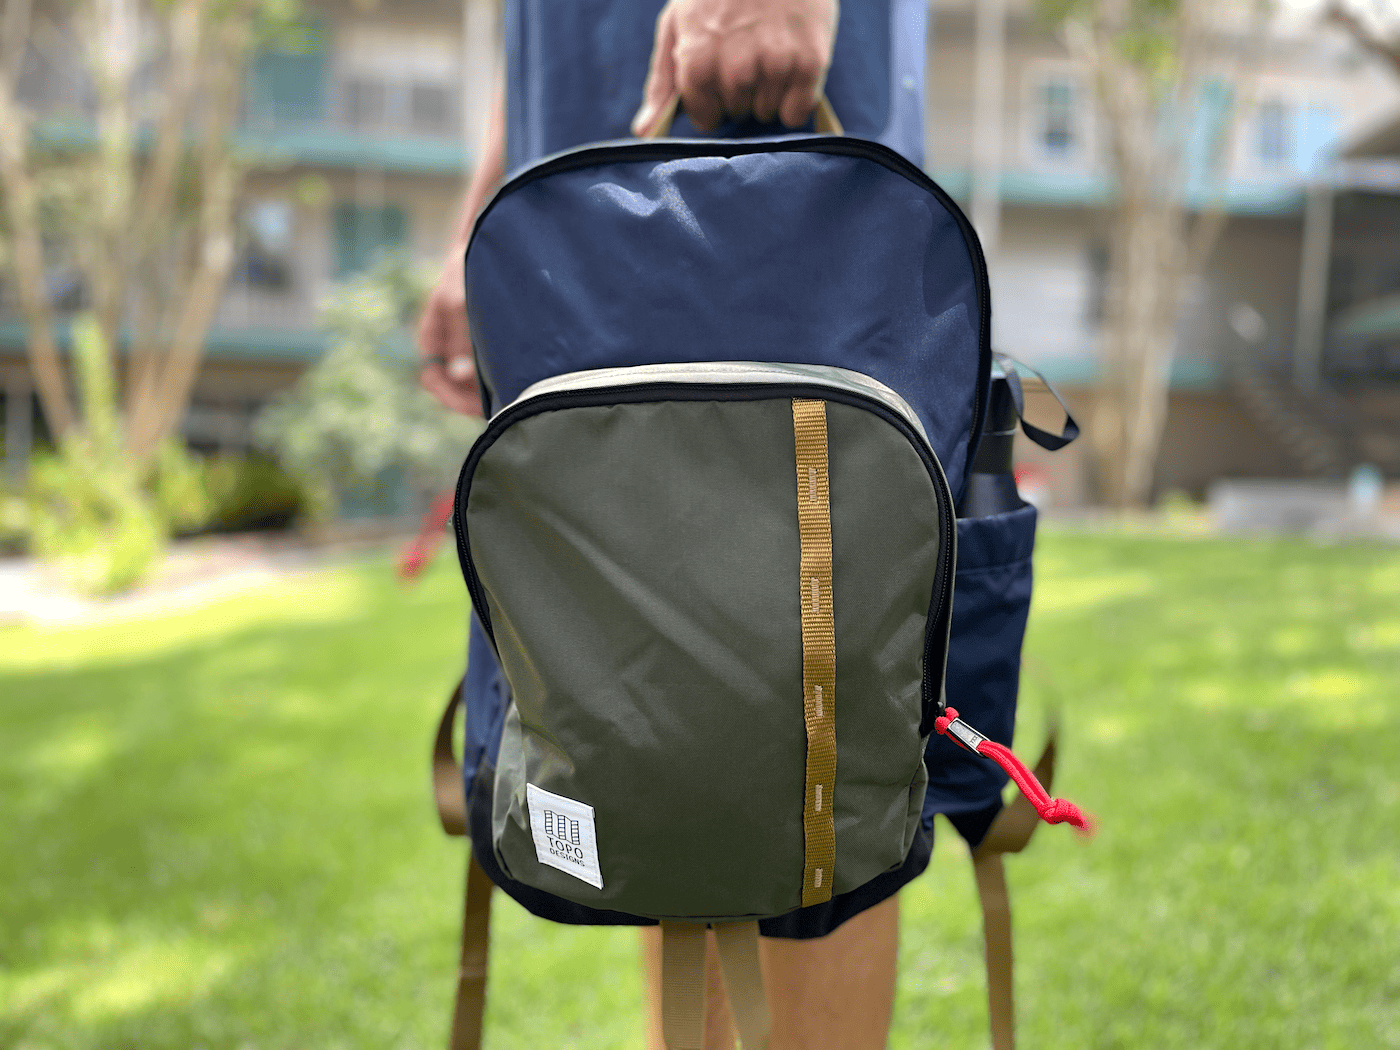 Carrying the TOPO sessions backpack